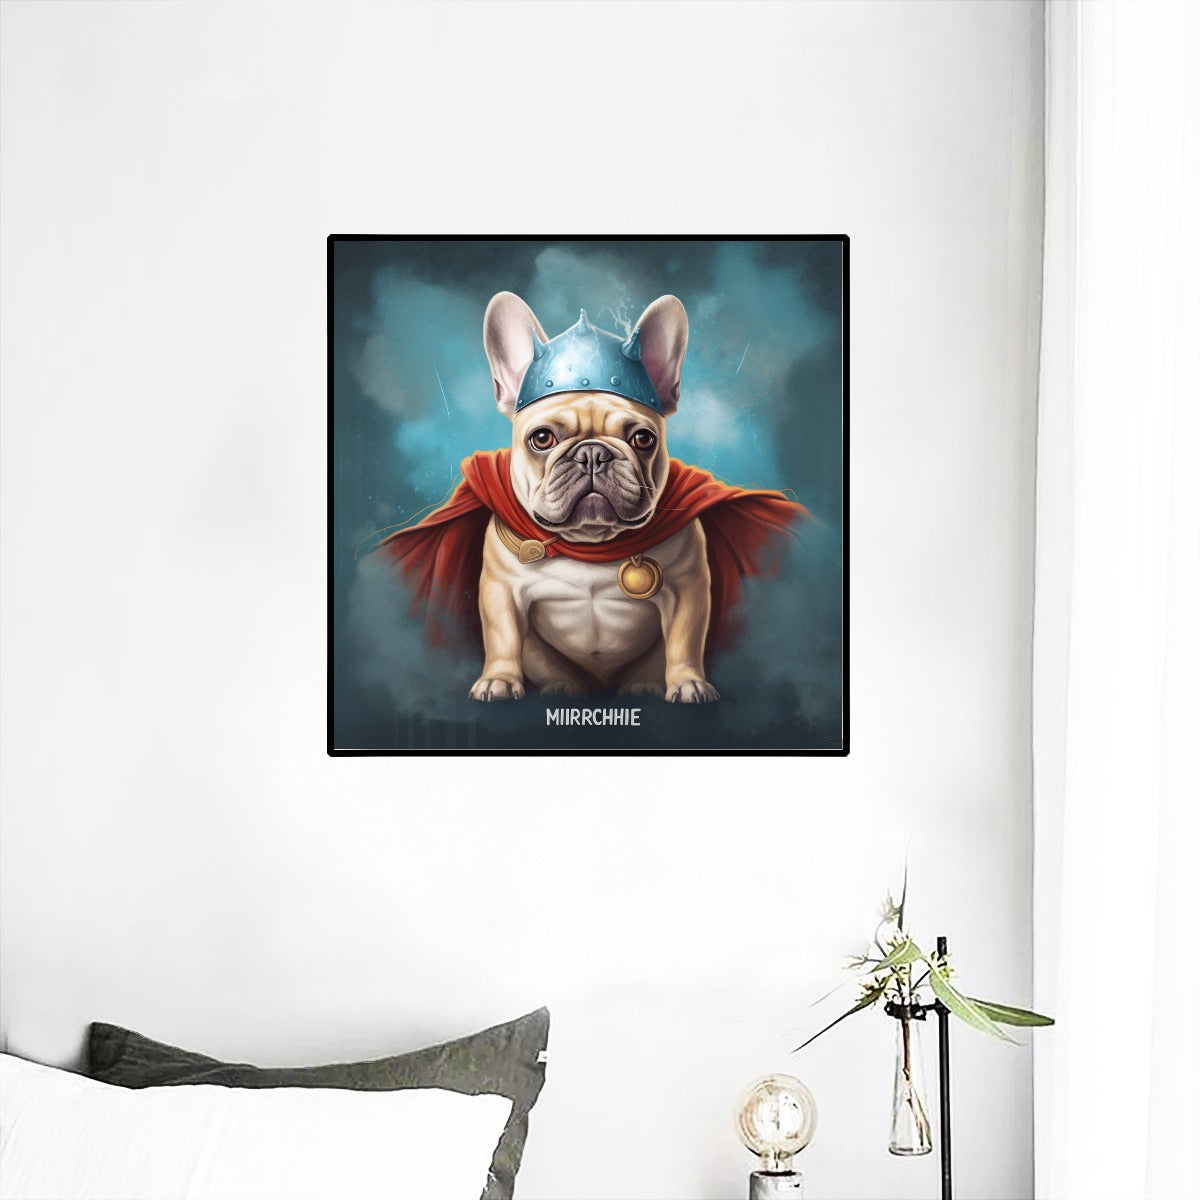 Thunderous Frenchie Wall Mural - Galvanize Your Space